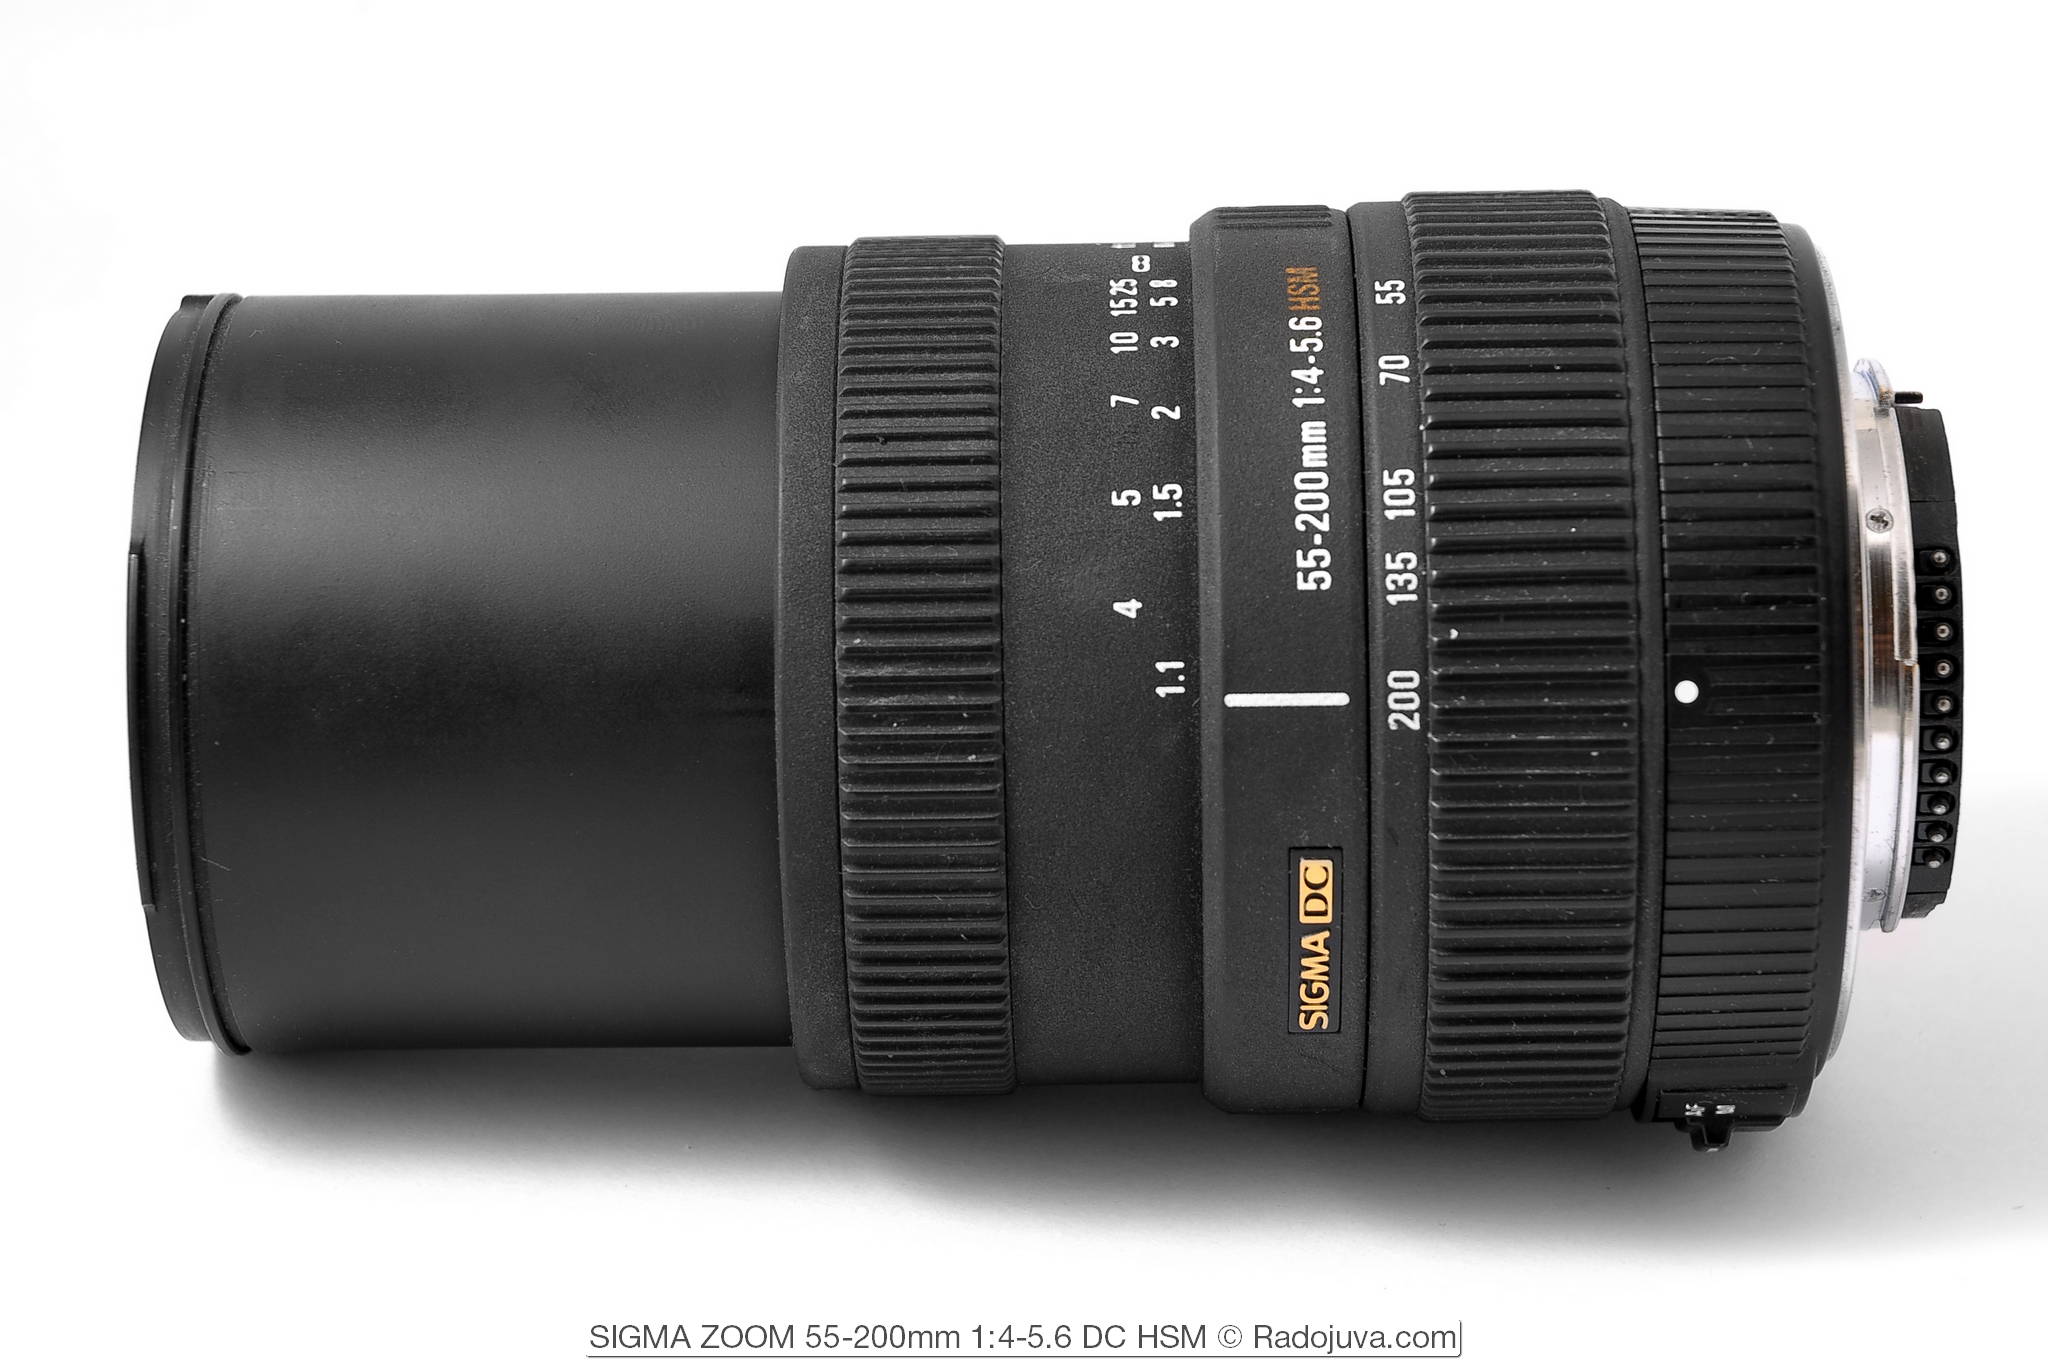 SIGMA ZOOM 55-200mm 1: 4-5.6 DC HSM Review | Happy